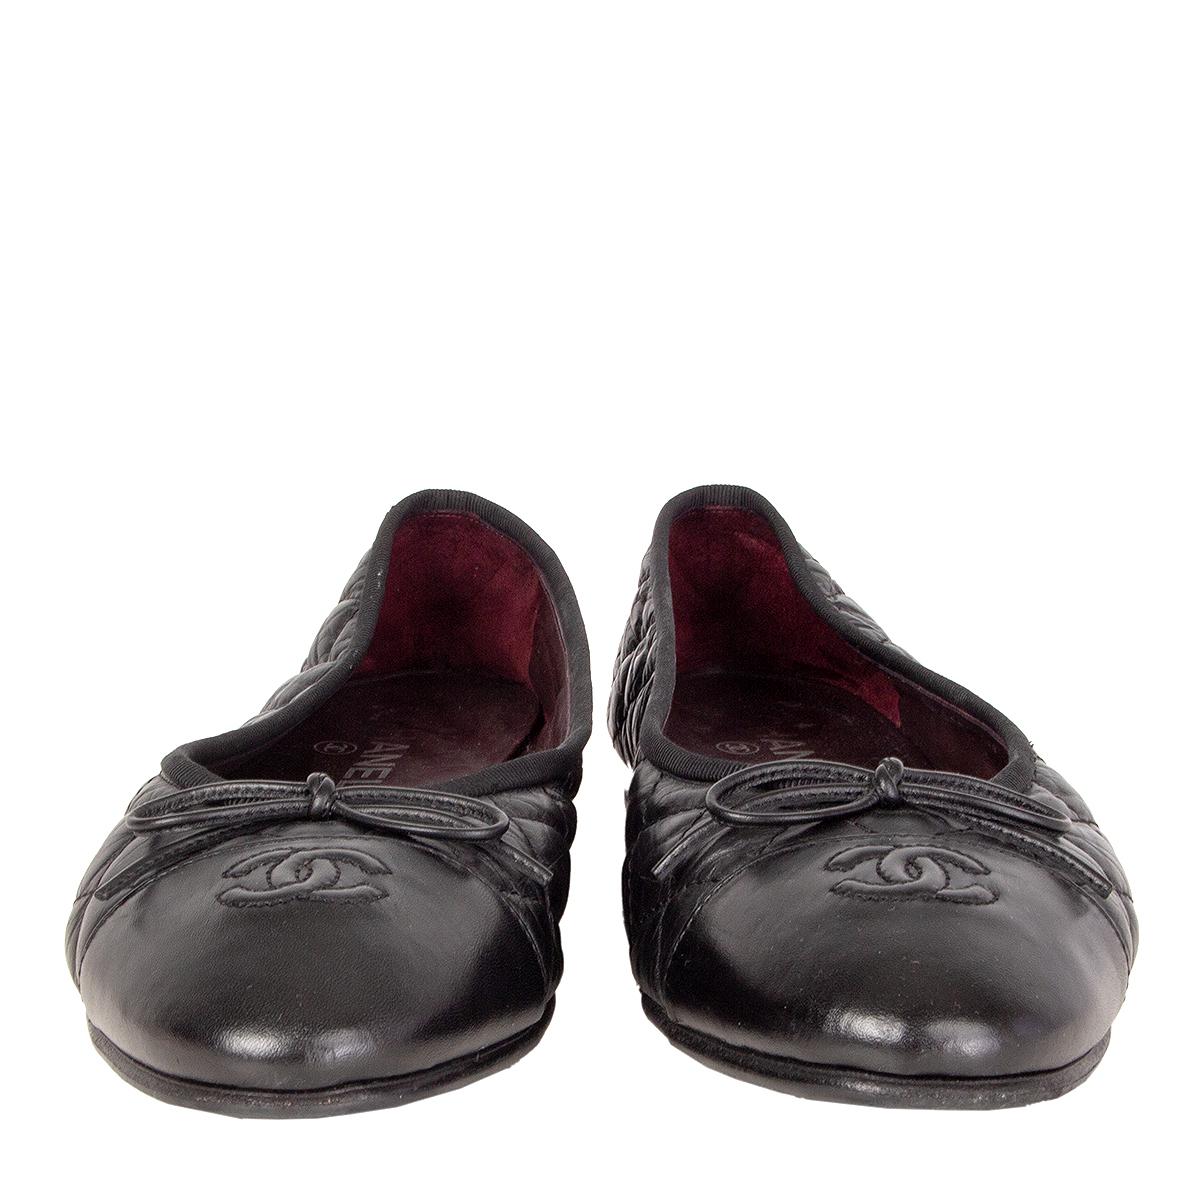 100% authentic Chanel classic ballet flats in black quilted vinatge calfskin. Have been worn and are in excellent condition. Black rubber sole has been added. 

Measurements
Imprinted Size	41C
Shoe Size	41
Inside Sole	26cm (10.1in)
Width	8cm